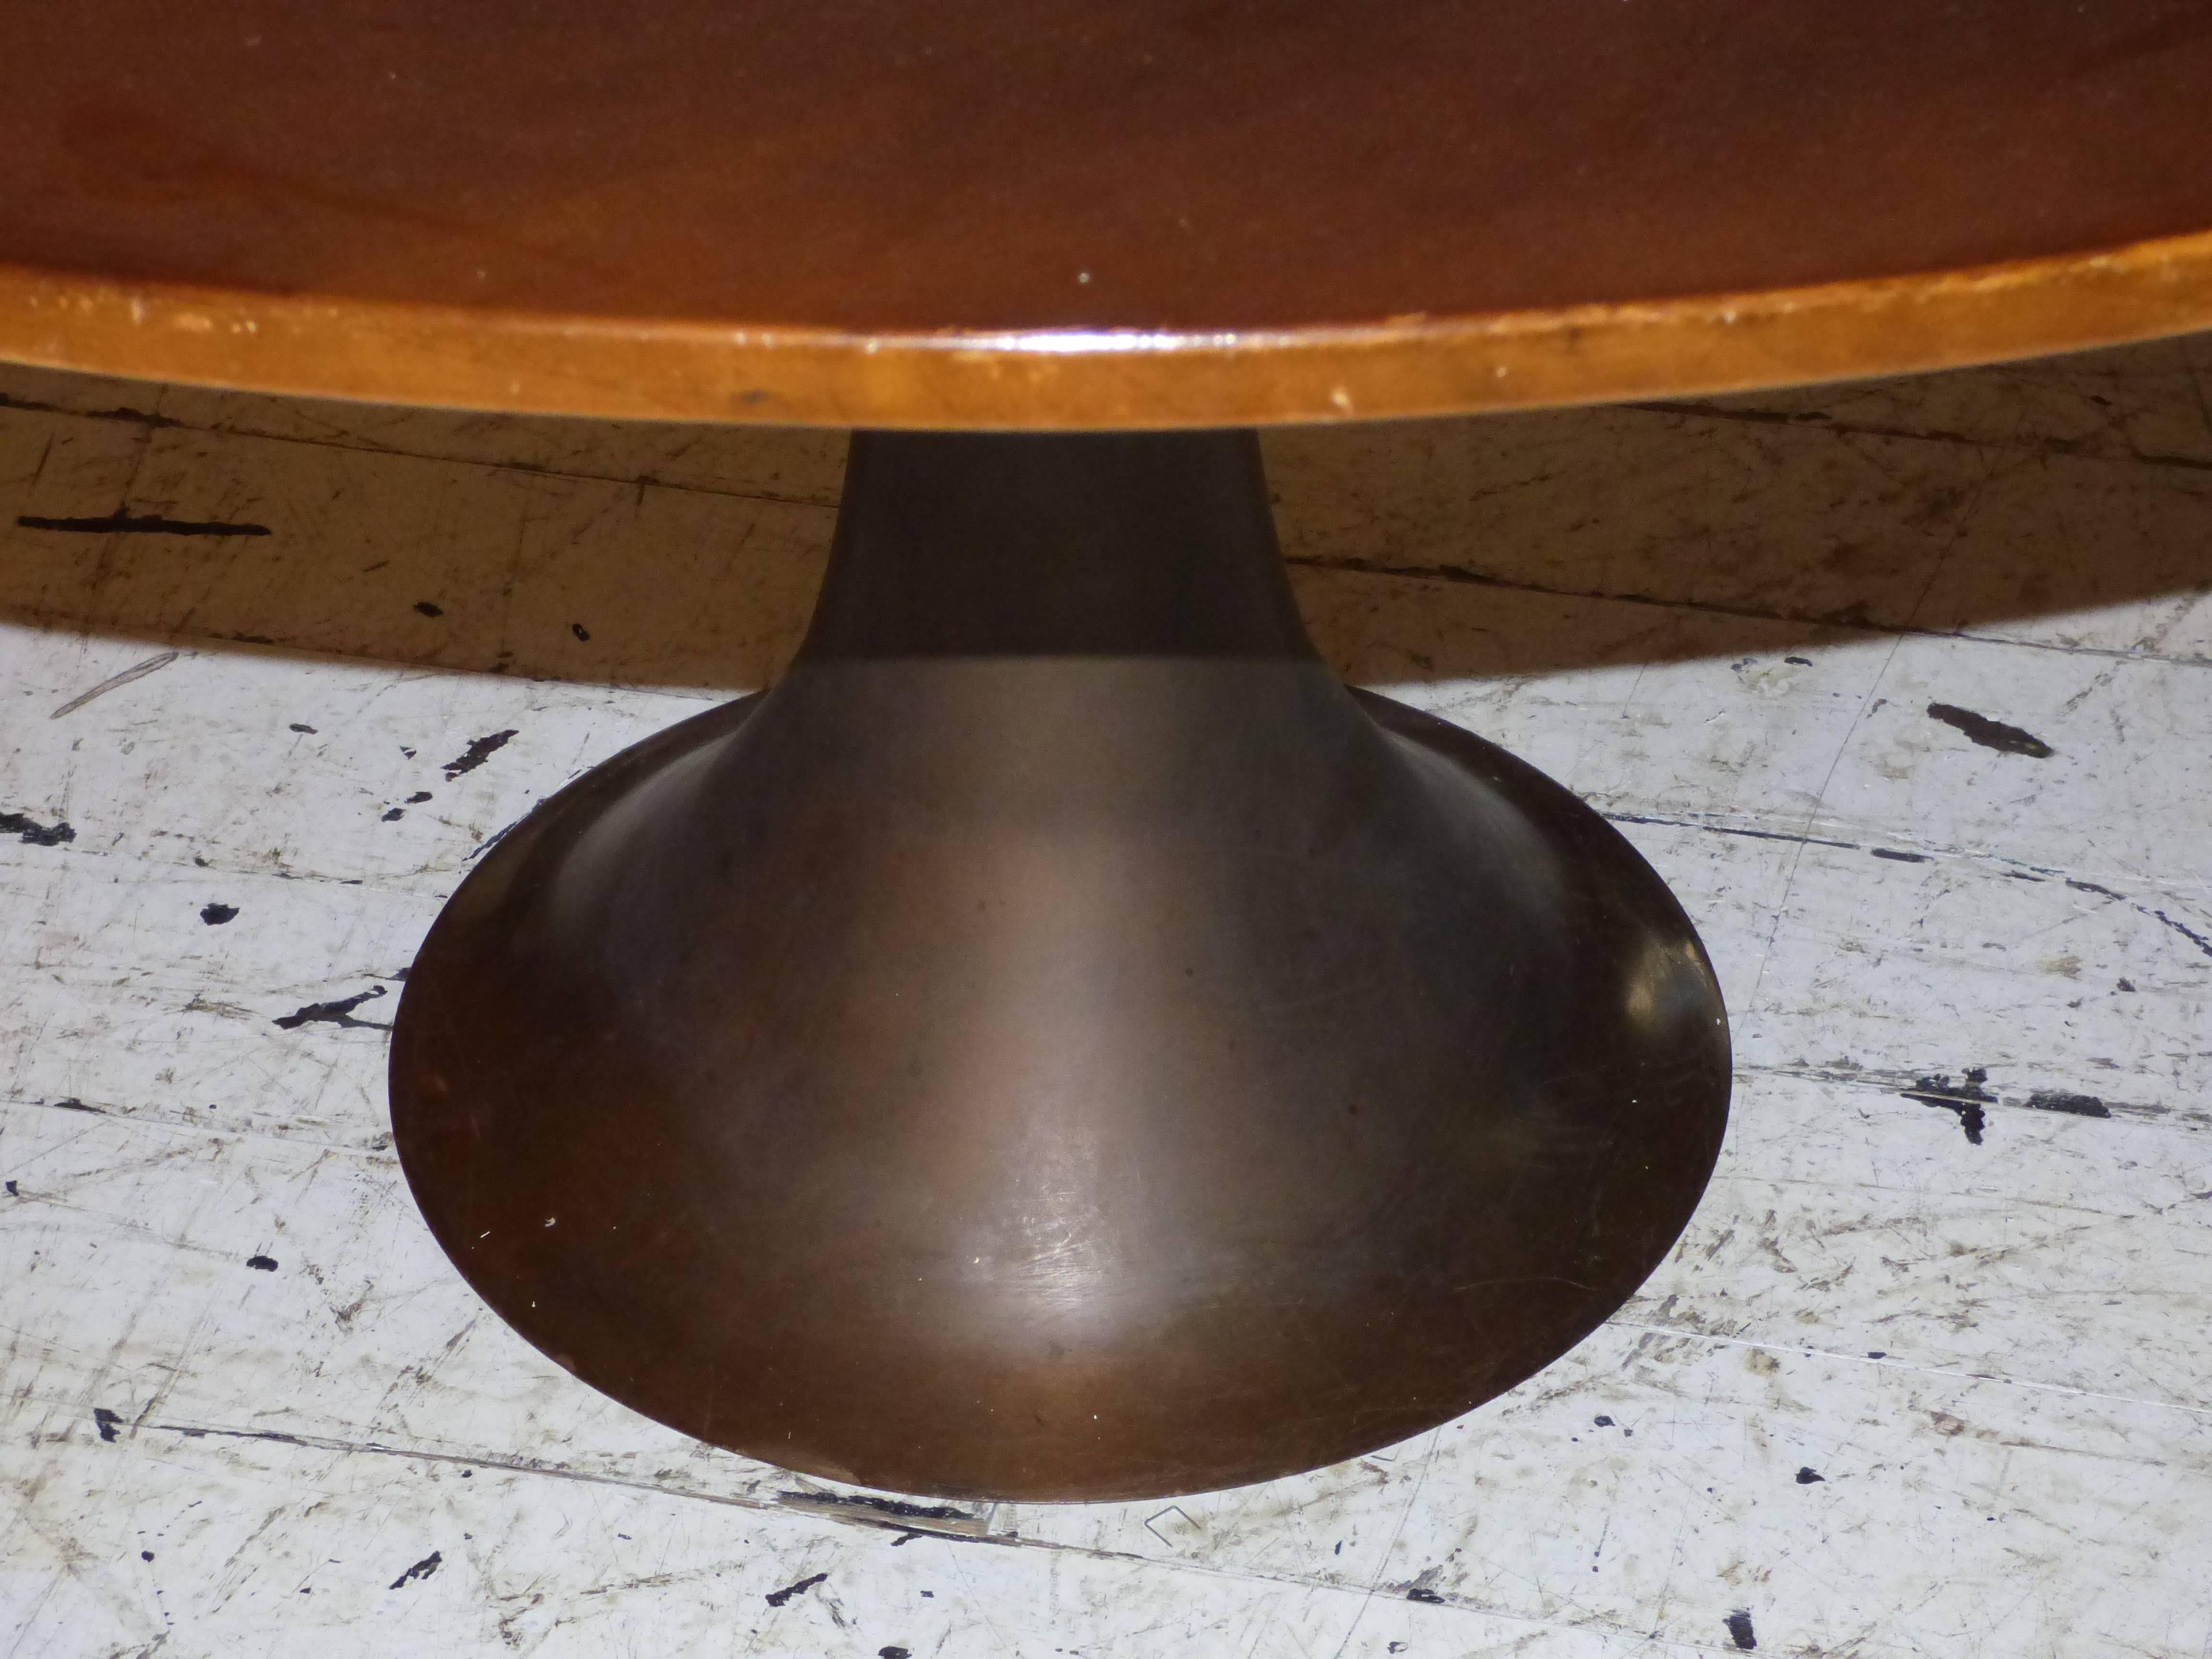 Table model 302 cast bronze finished on a lathe and wood floor designed by Angelo Mangiarotti and produced by Bernini in 1959.